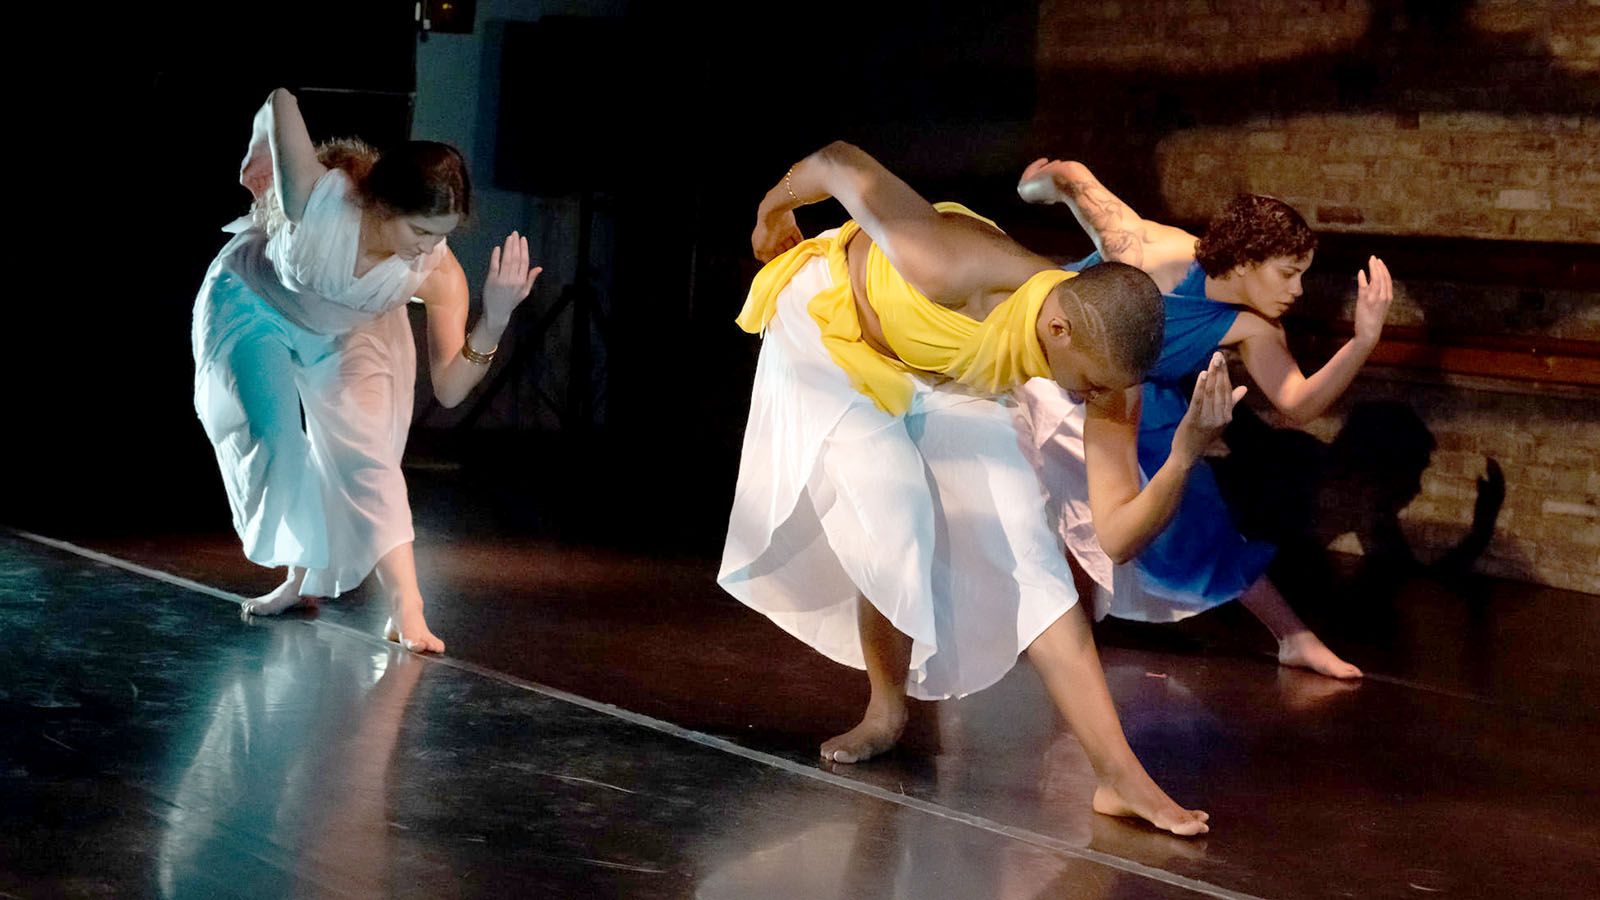 Fort Wayne Dance Collective will host their Choreographer’s Lab Performances on April 29-30.